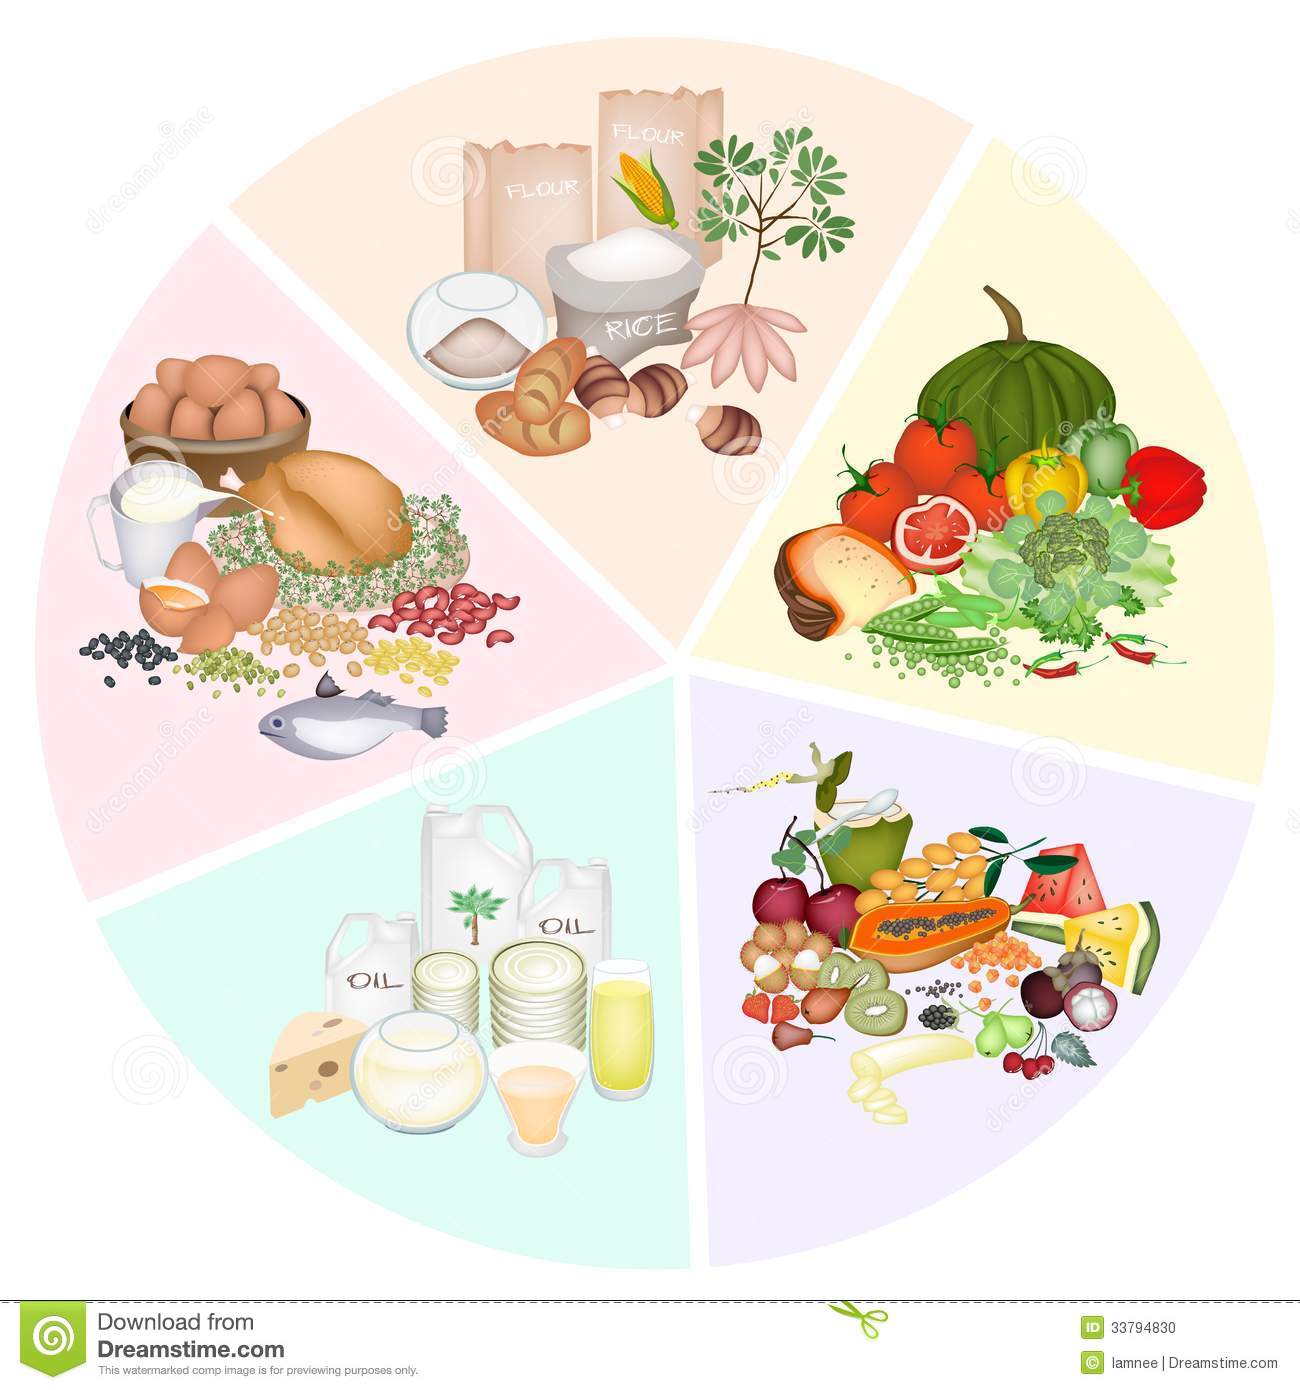 Pie Chart Of Food Groups For Carbohydrate Protein Fat Vitamin And